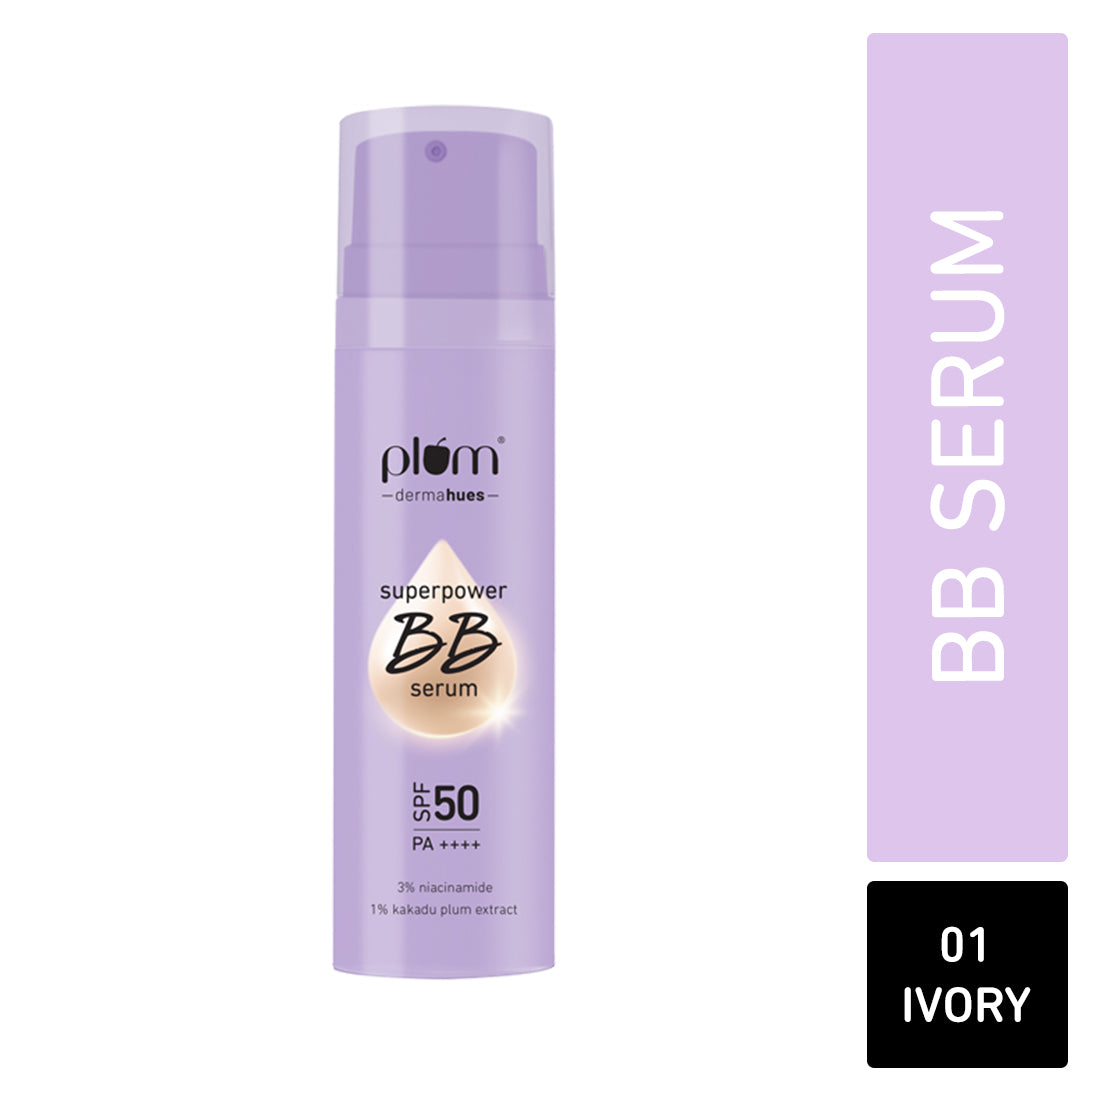 

Superpower BB Serum with SPF 50 PA ++++ | Natural Everyday Base | Evens Out Skin Tone | Buildable Coverage | With 3% Niacinamide | 100% Vegan & Cruelty Free, 01 Ivory